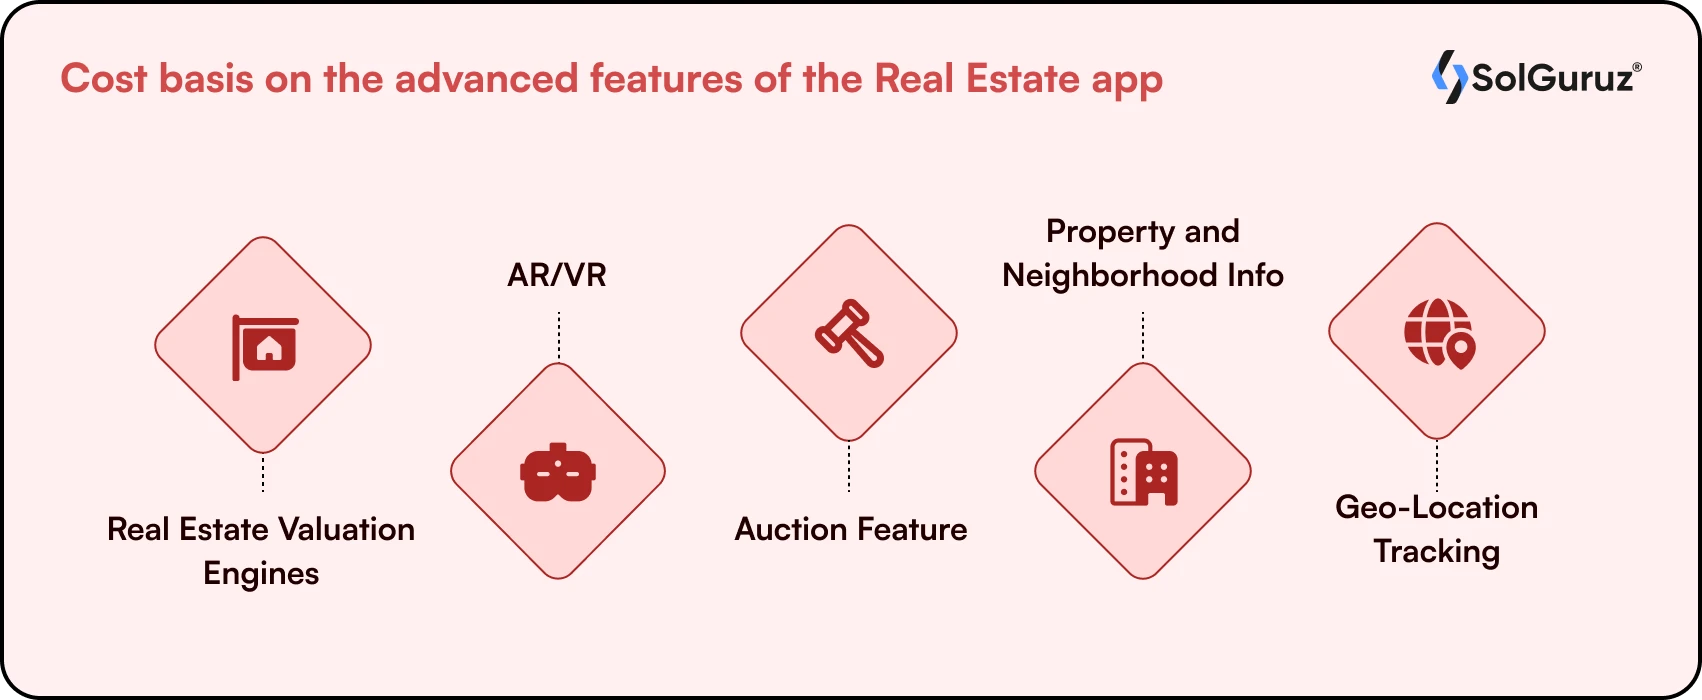 Cost basis on the advanced features of the Real Estate app